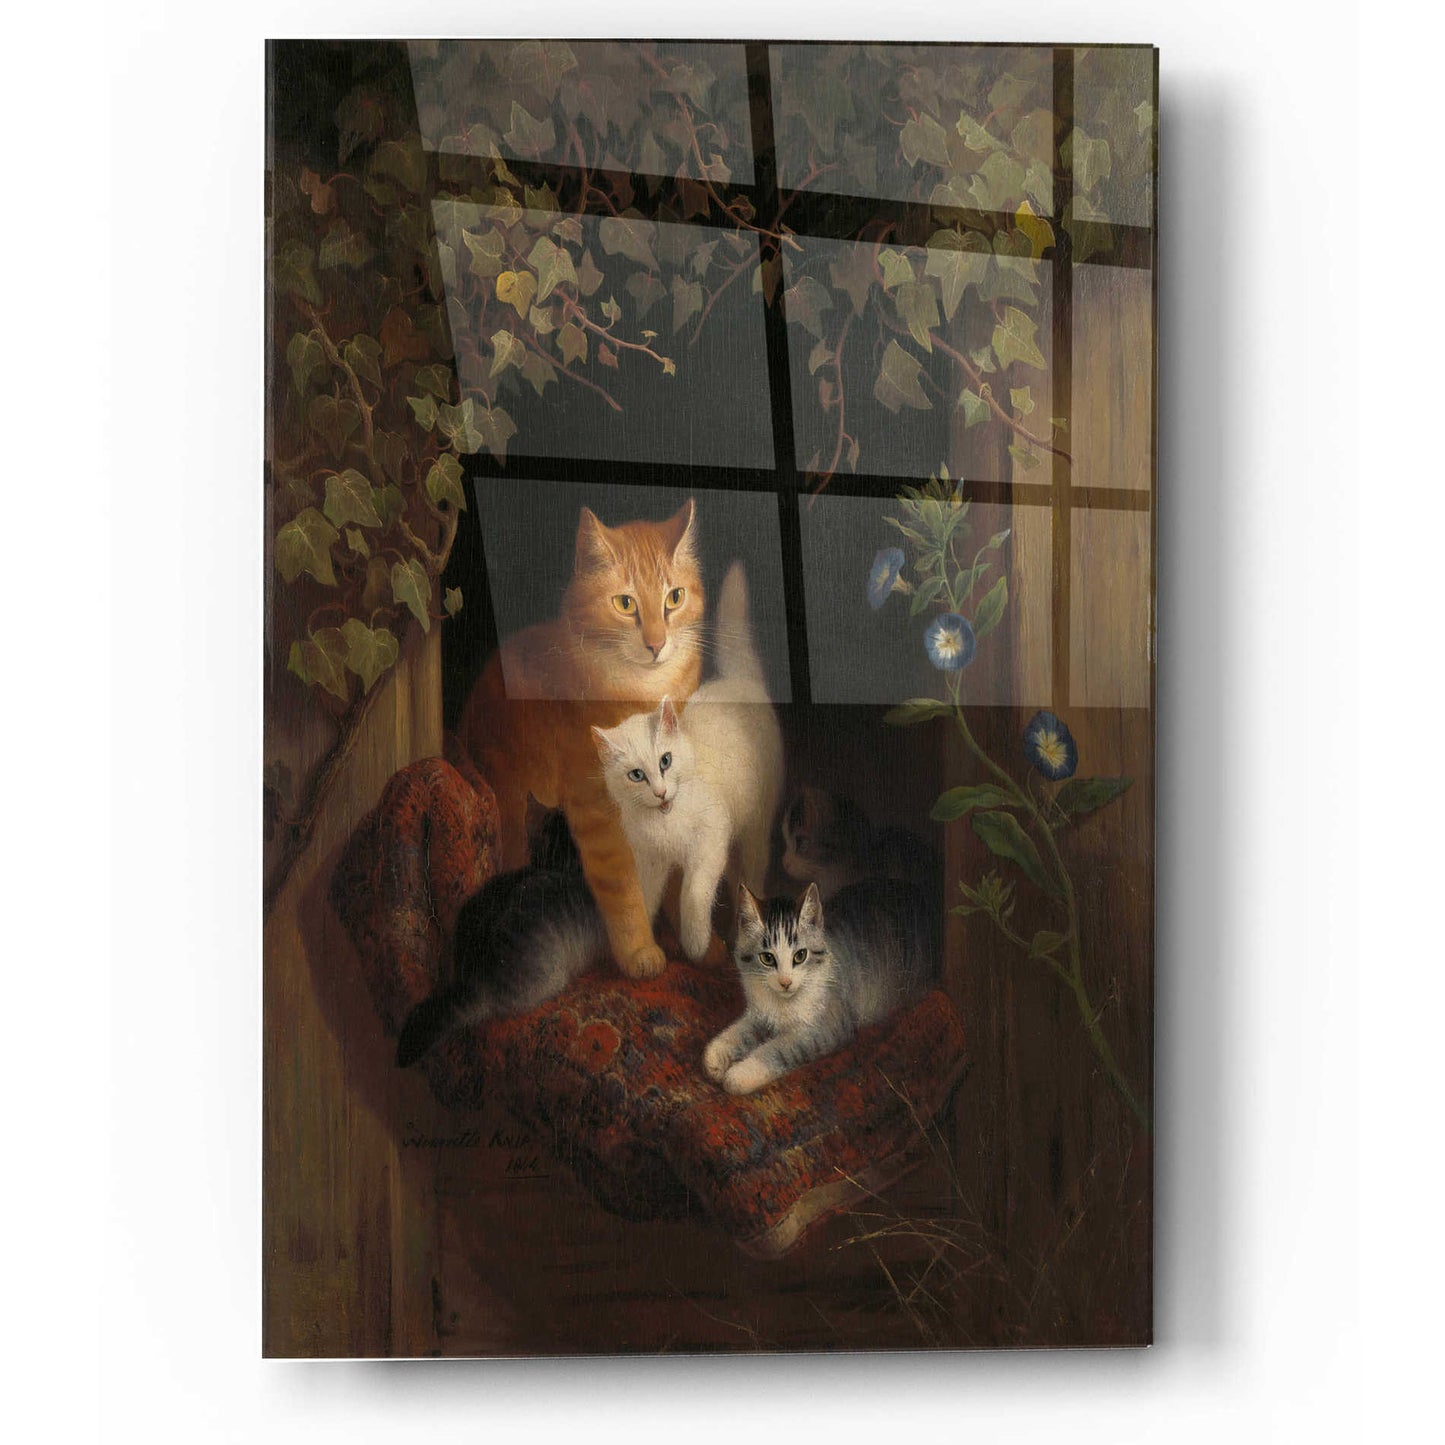 Epic Art 'Cat with Kittens' by Henriette Ronner-Knip, Acrylic Glass Wall Art,12x16